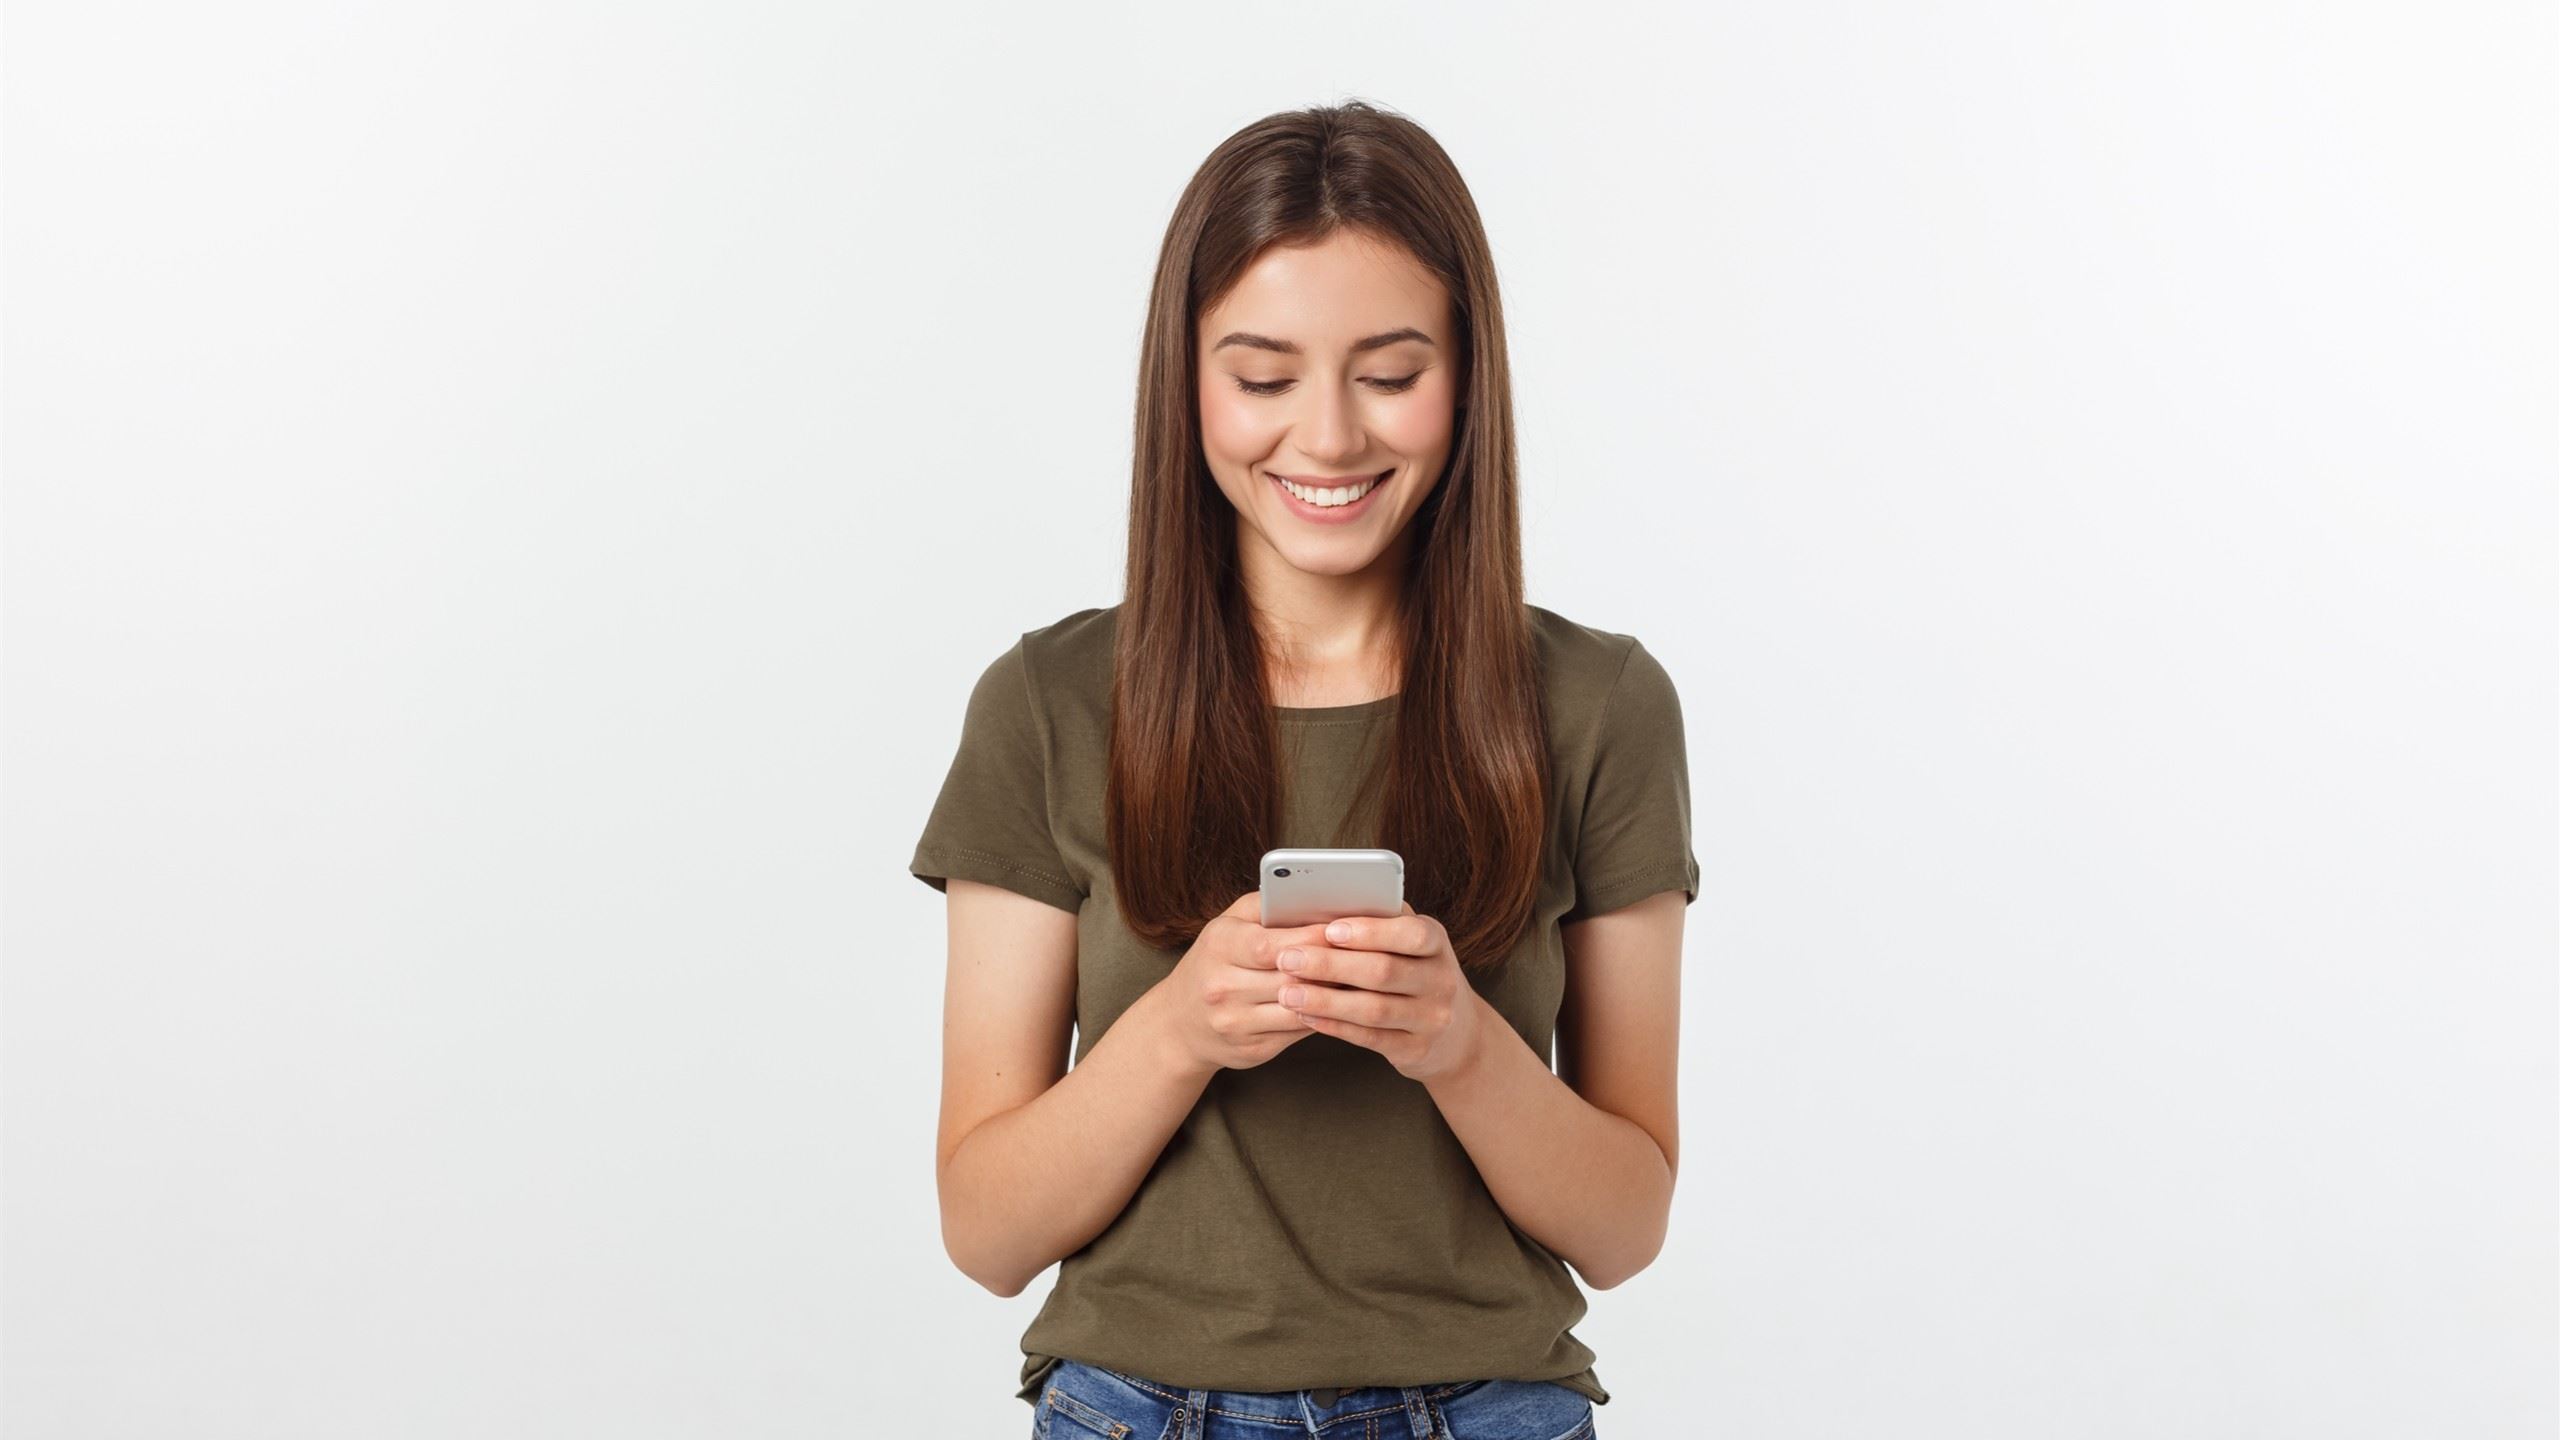 A cute woman smiling while texting.